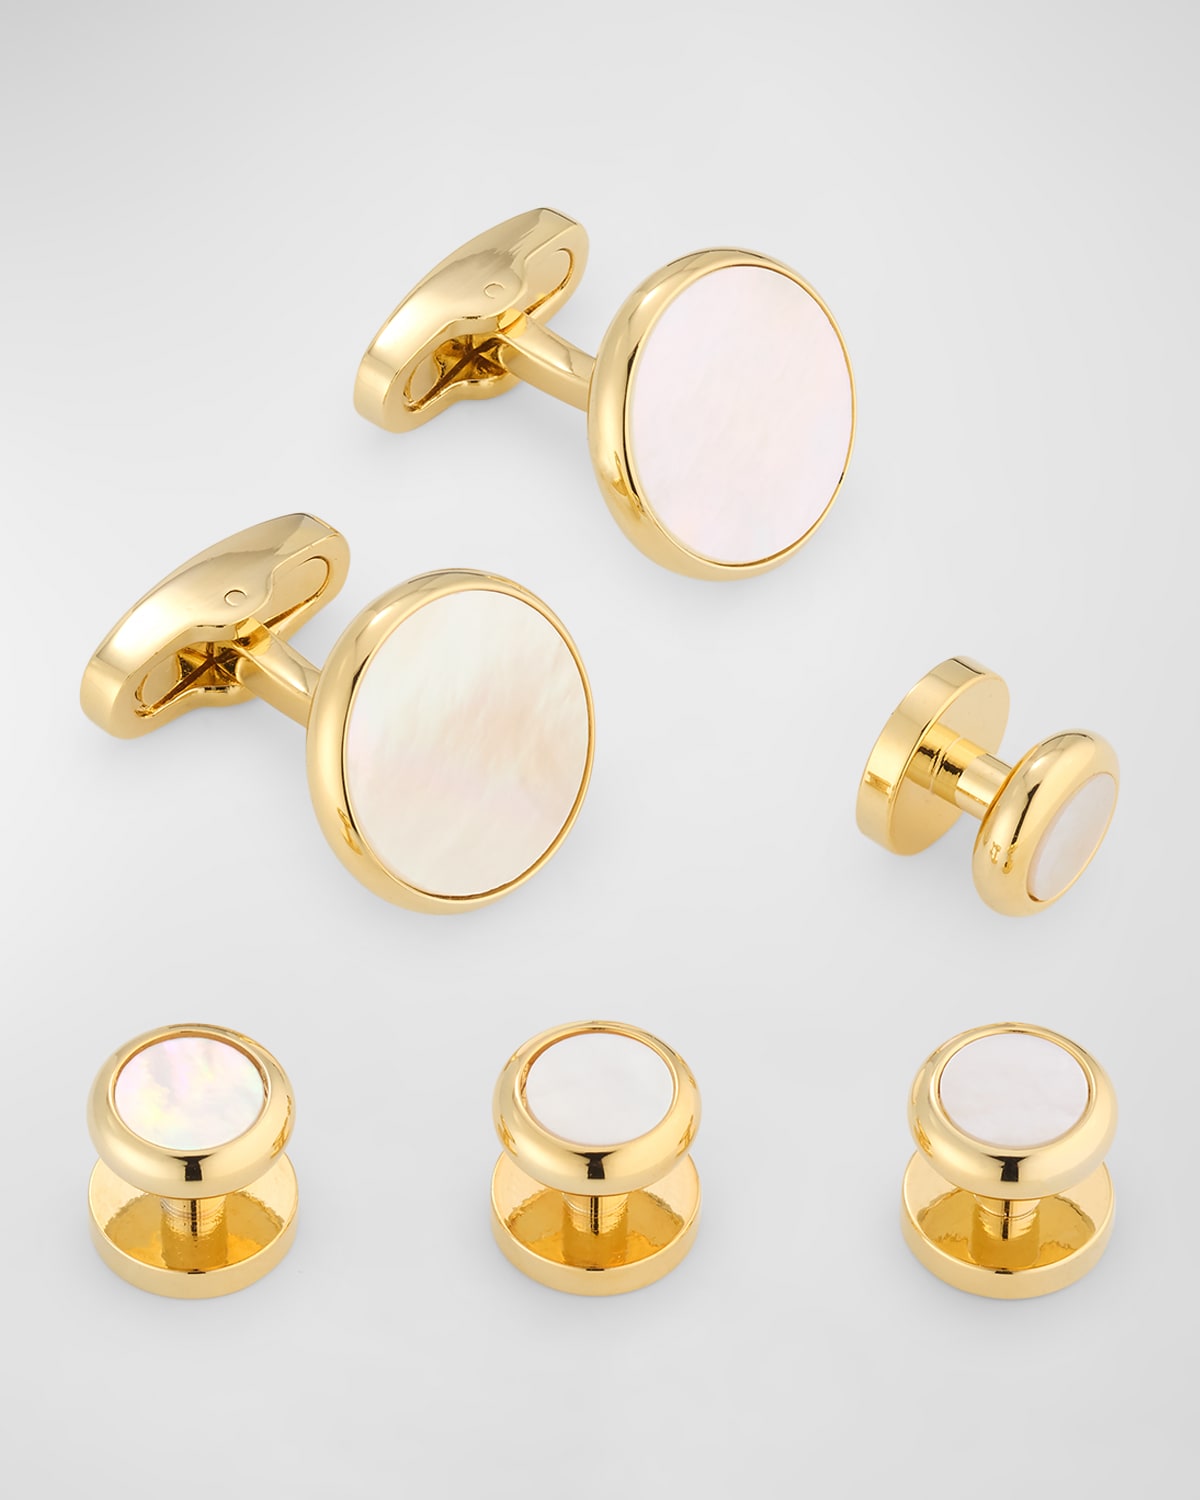 Men's Classic Round Mother-Of-Pearl Cufflink Stud Set